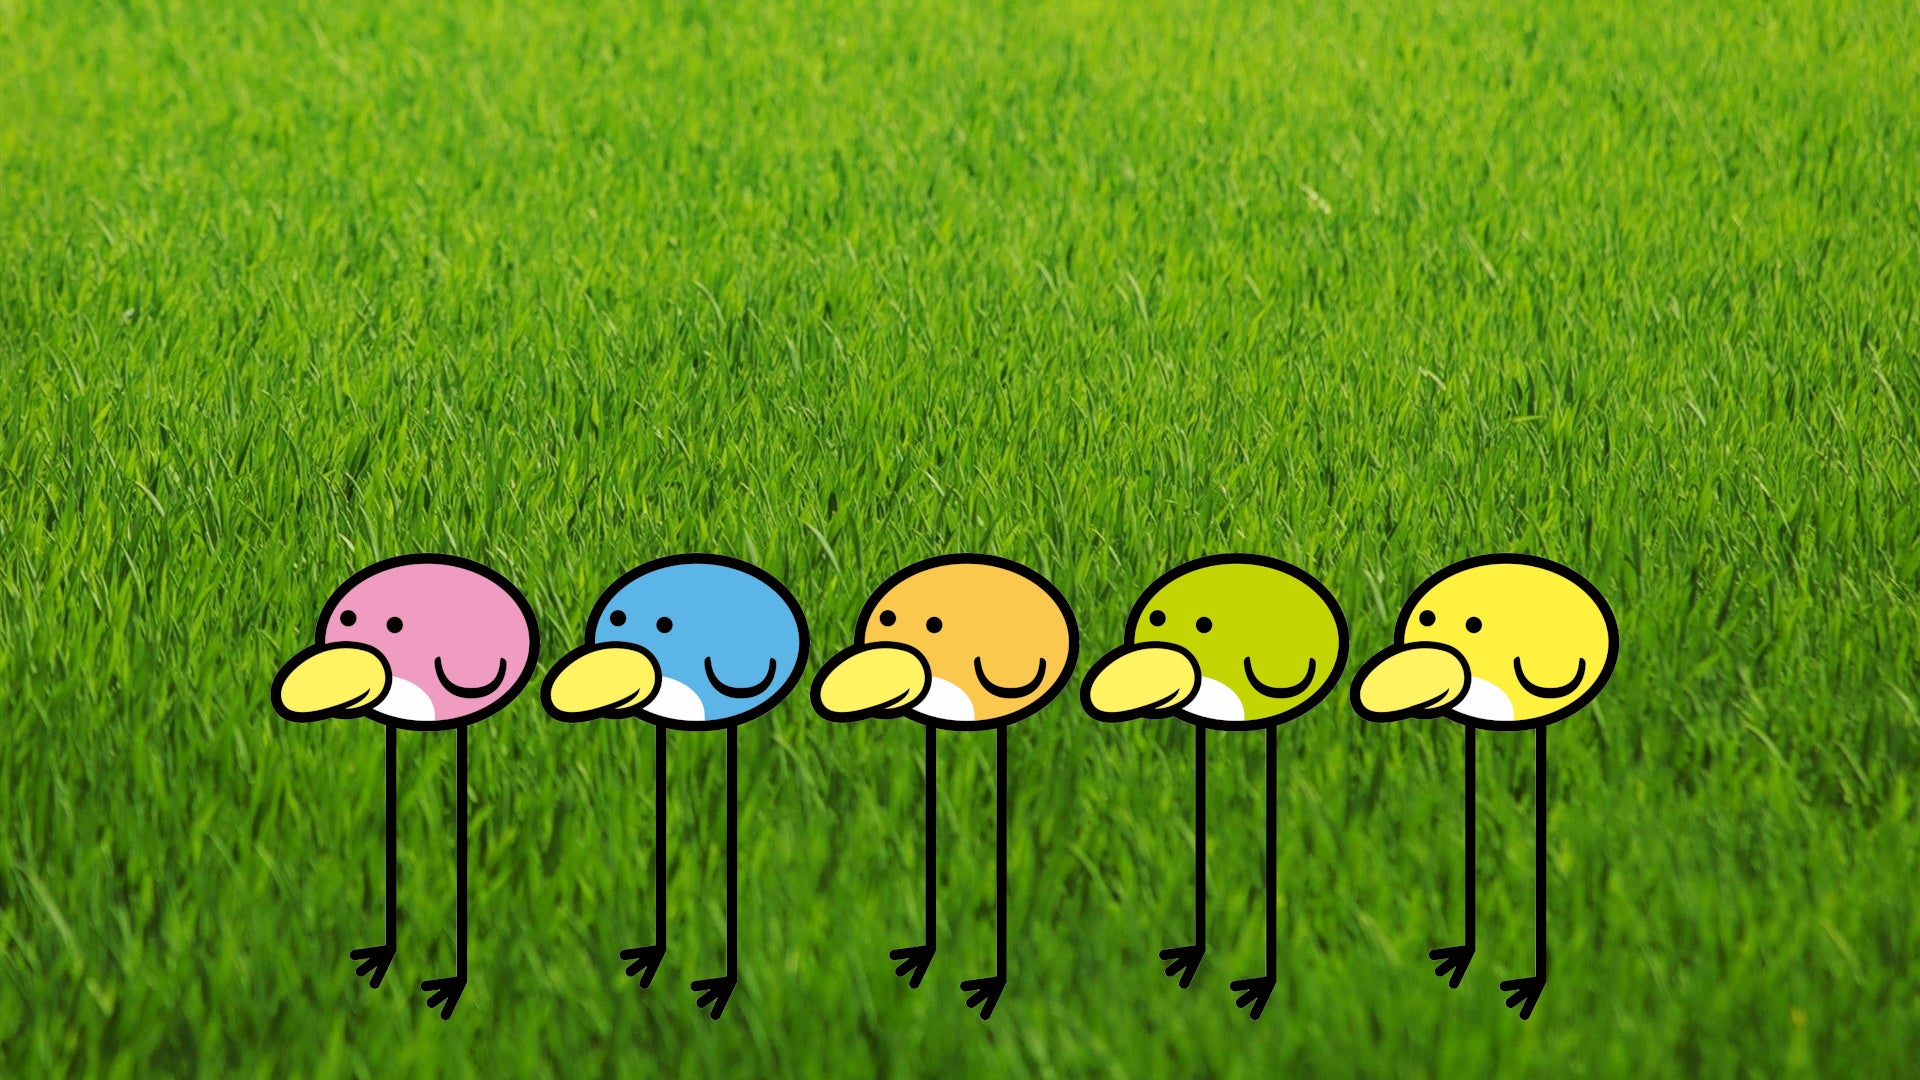 Some Rhythm Heaven wallpaper I made. What do you think?